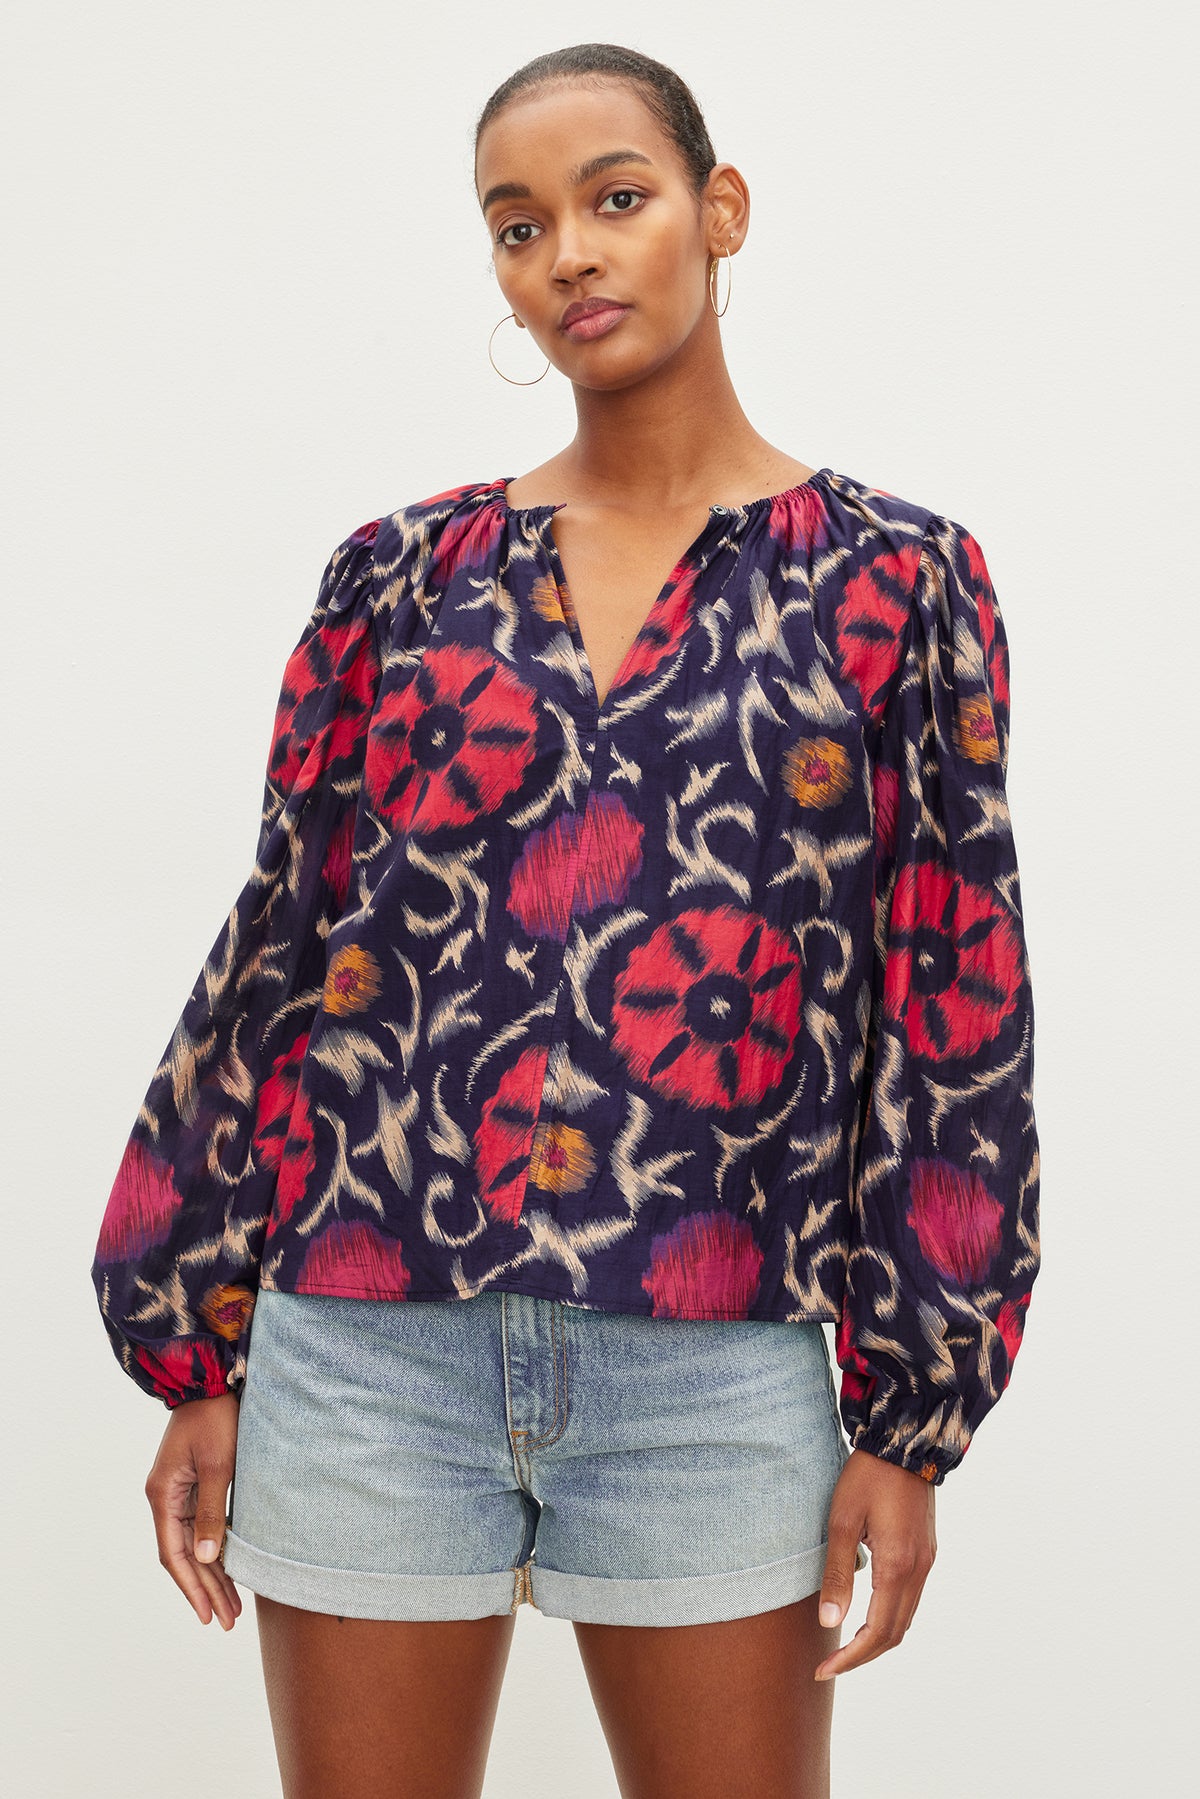 Woman posing in a Fraser printed silk cotton voile top by Velvet by Graham & Spencer with long sleeves and an elastic neckline, paired with denim shorts.-36387183427777